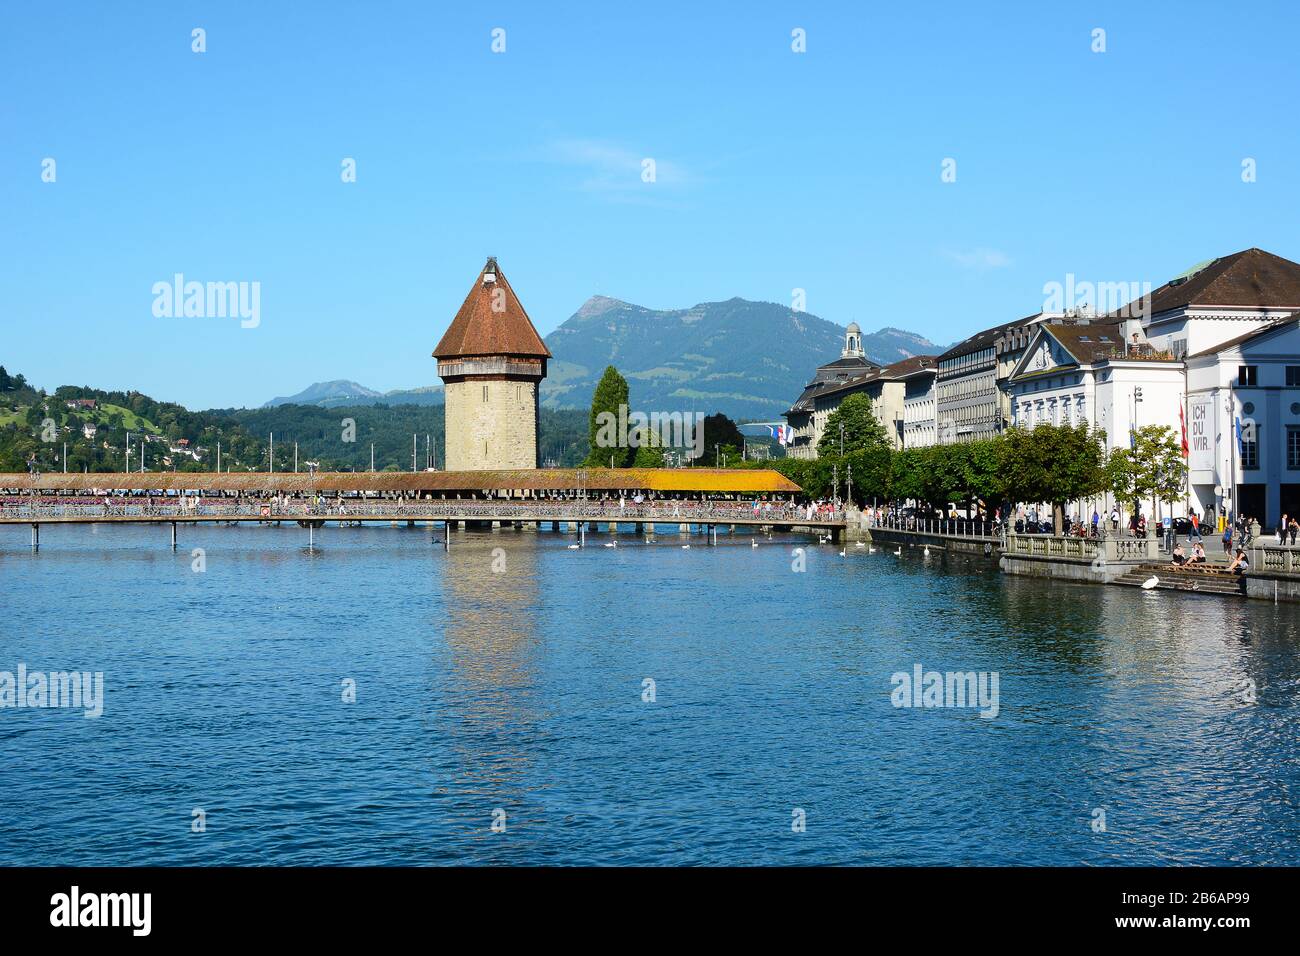 LUCERNE, SWITZERLAND - JULY 3, 2014: Chapel Bridge on the Reuss River. Mountains, Hotels and the train station are in the background. Stock Photo